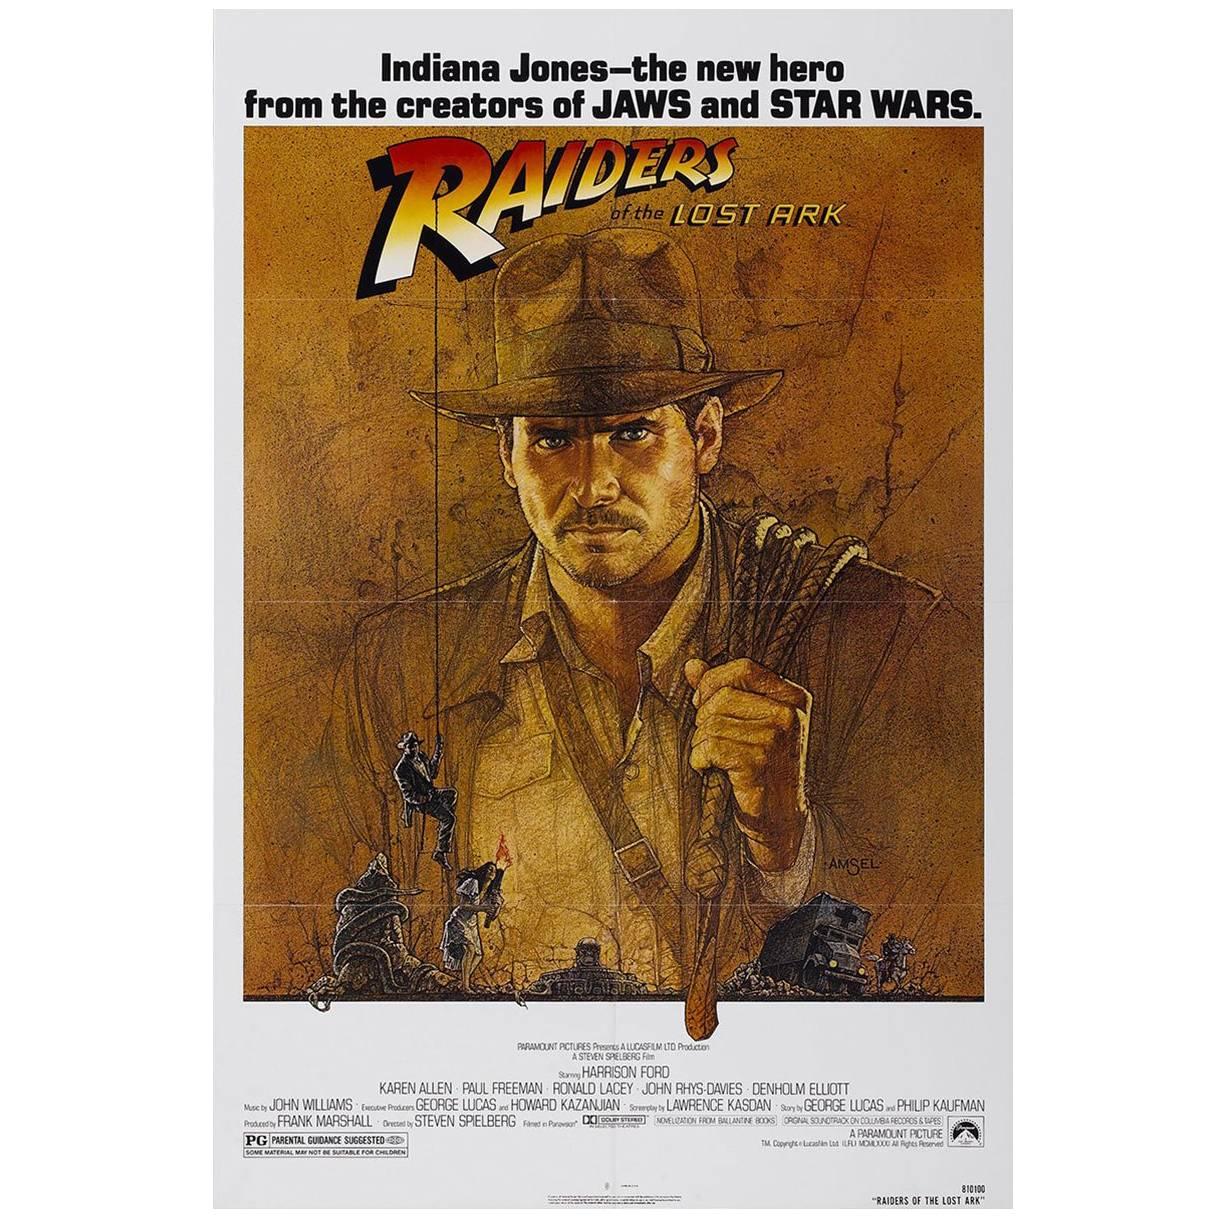 "Raiders Of The Lost Ark" Film Poster, 1981 For Sale